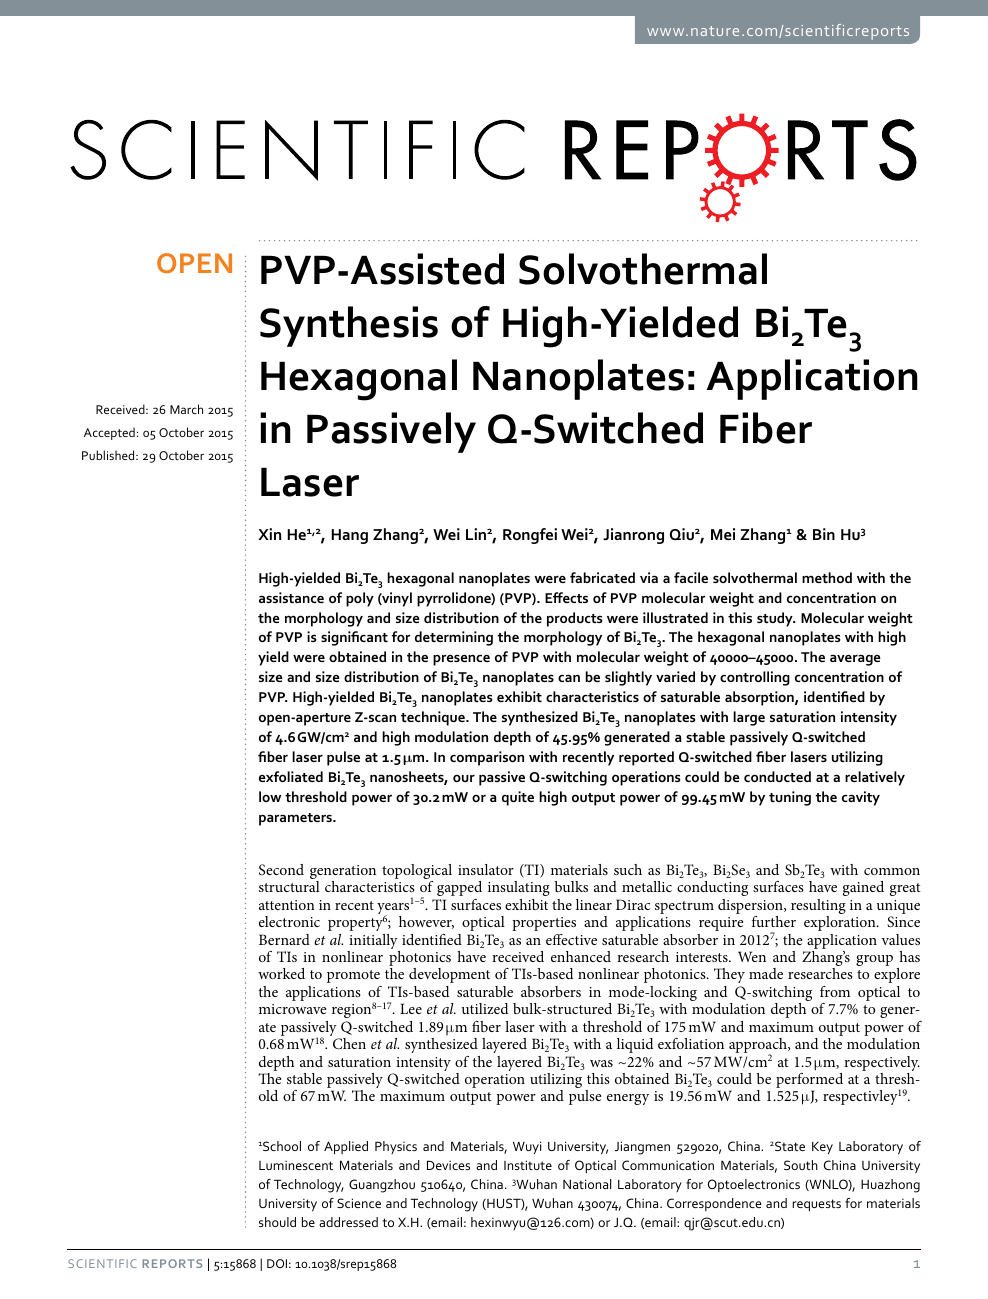 Pvp Assisted Solvothermal Synthesis Of High Yielded Bi2te3 Hexagonal Nanoplates Application In Passively Q Switched Fiber Laser Topic Of Research Paper In Nano Technology Download Scholarly Article Pdf And Read For Free On Cyberleninka Open